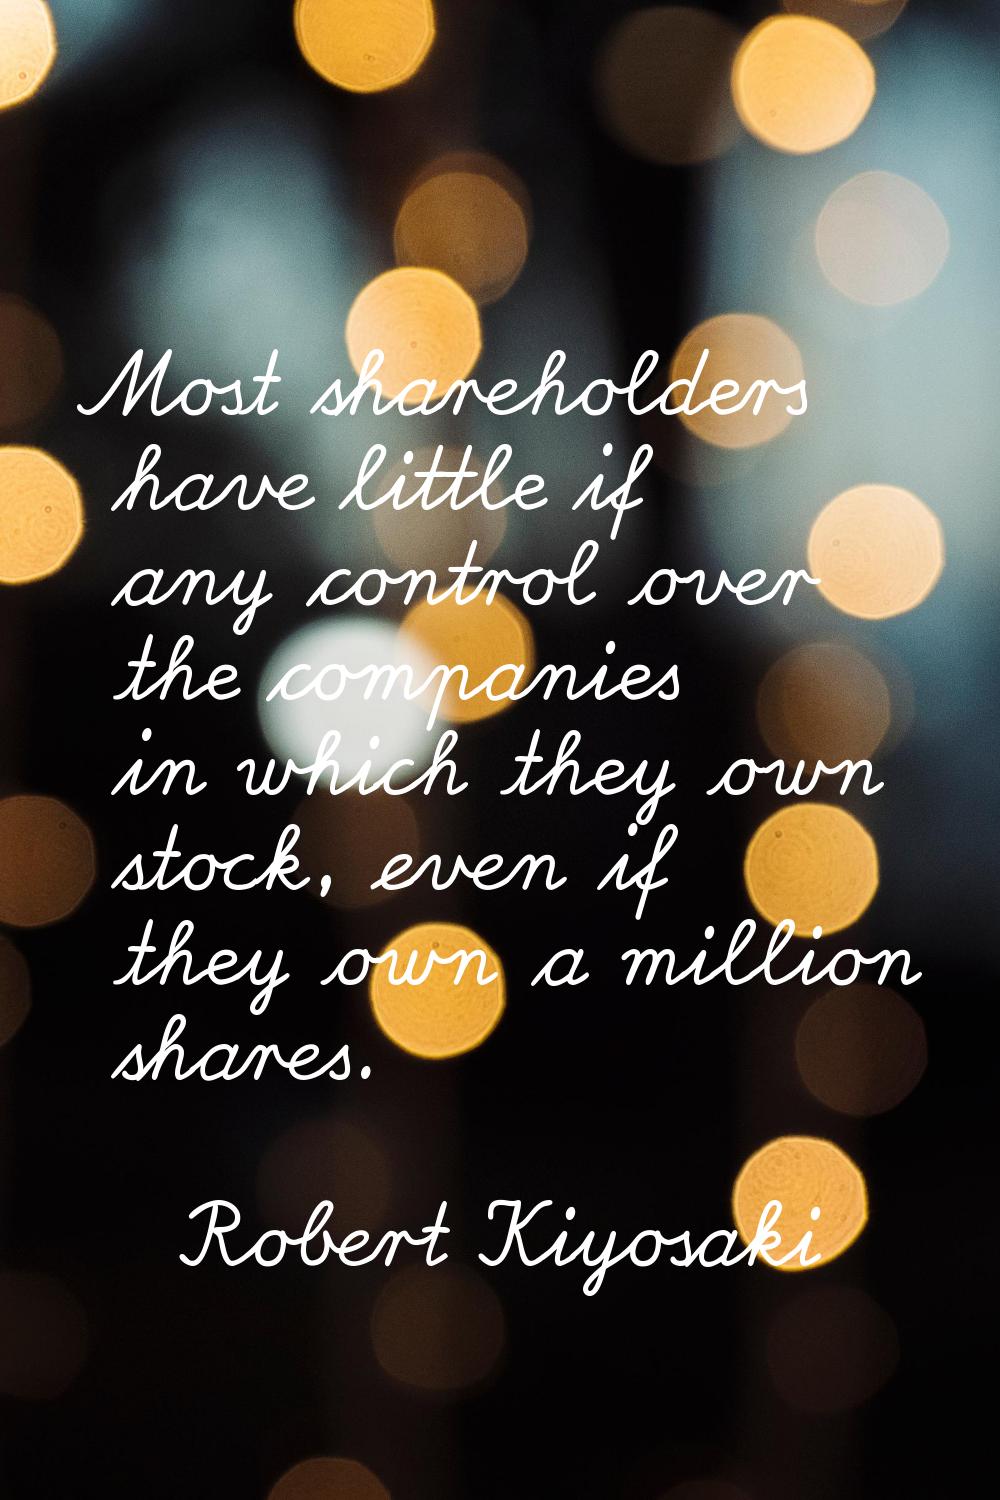 Most shareholders have little if any control over the companies in which they own stock, even if th